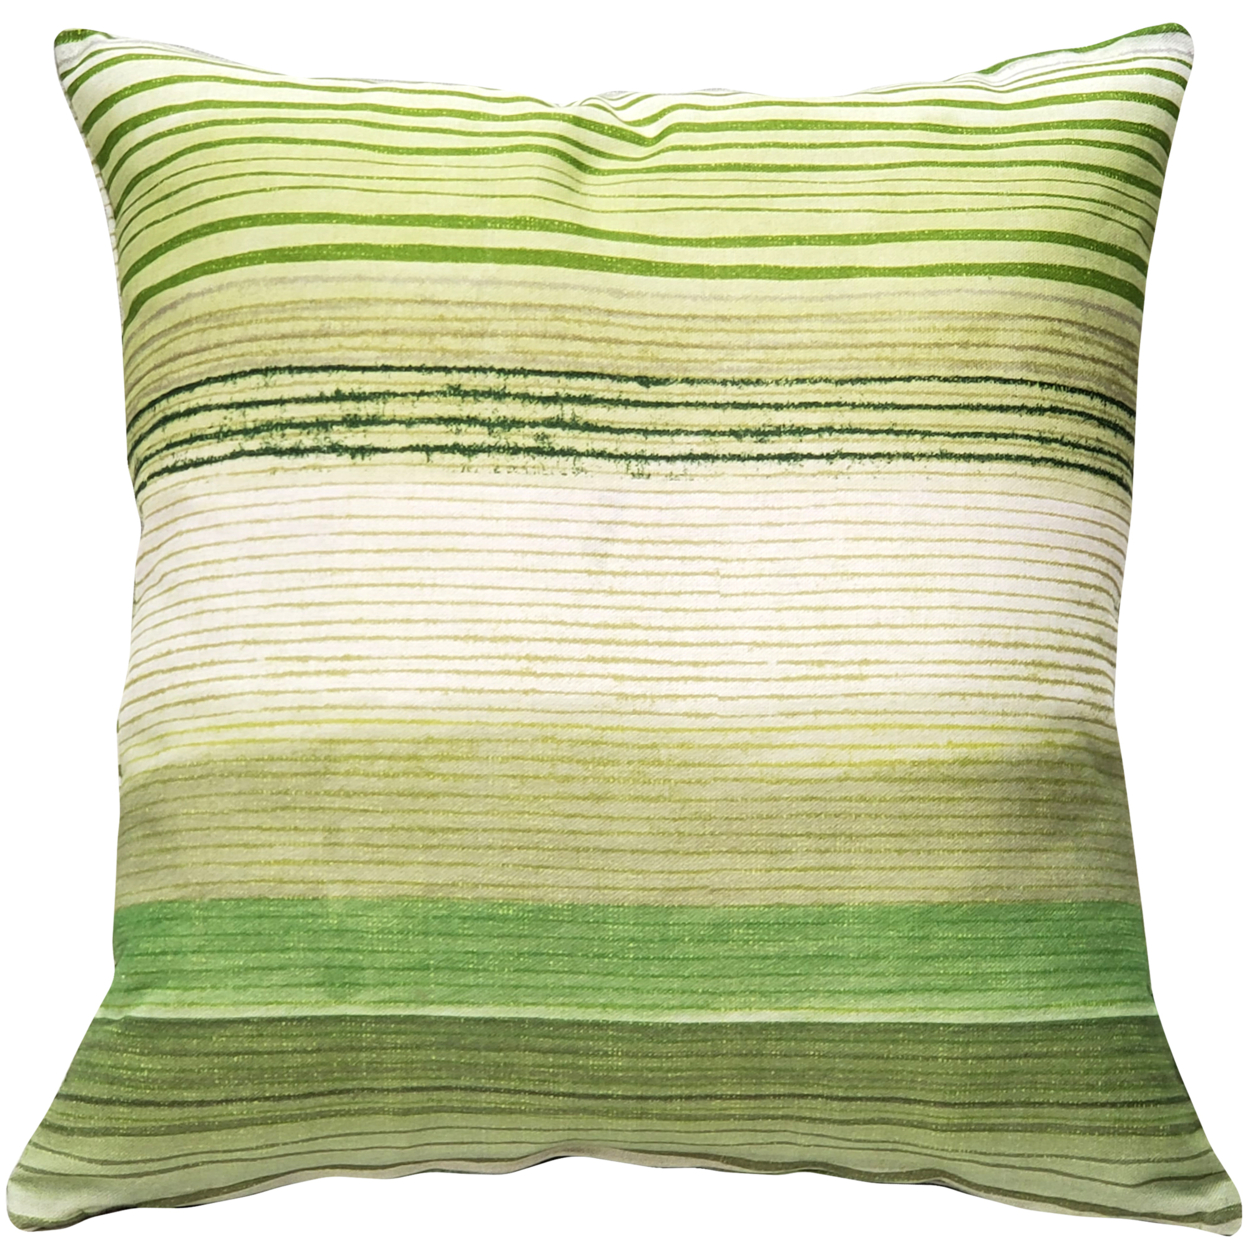 Sedona Stripes Green Throw Pillow 17x17 Inches Square, Complete Pillow With Polyfill Pillow Insert